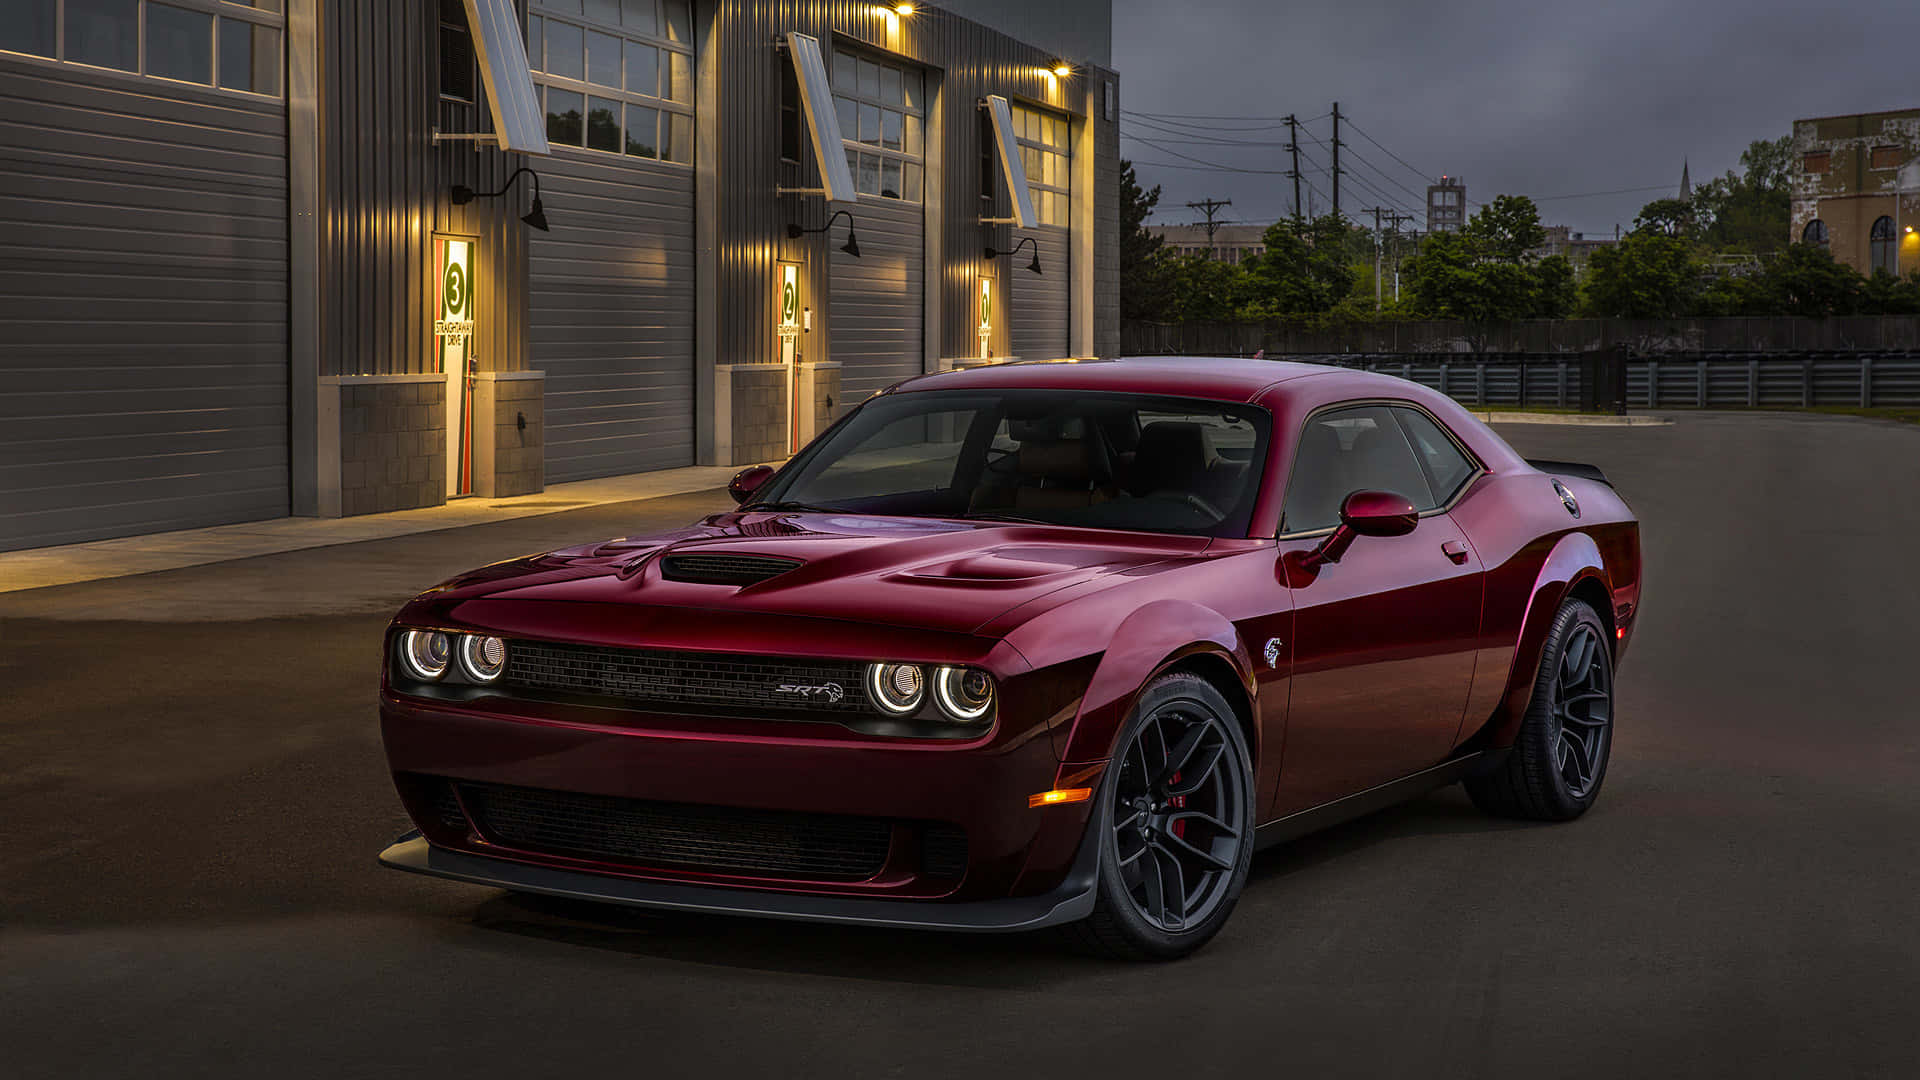 The Red 2019 Dodge Challenger Srt Is Parked In Front Of A Garage Background